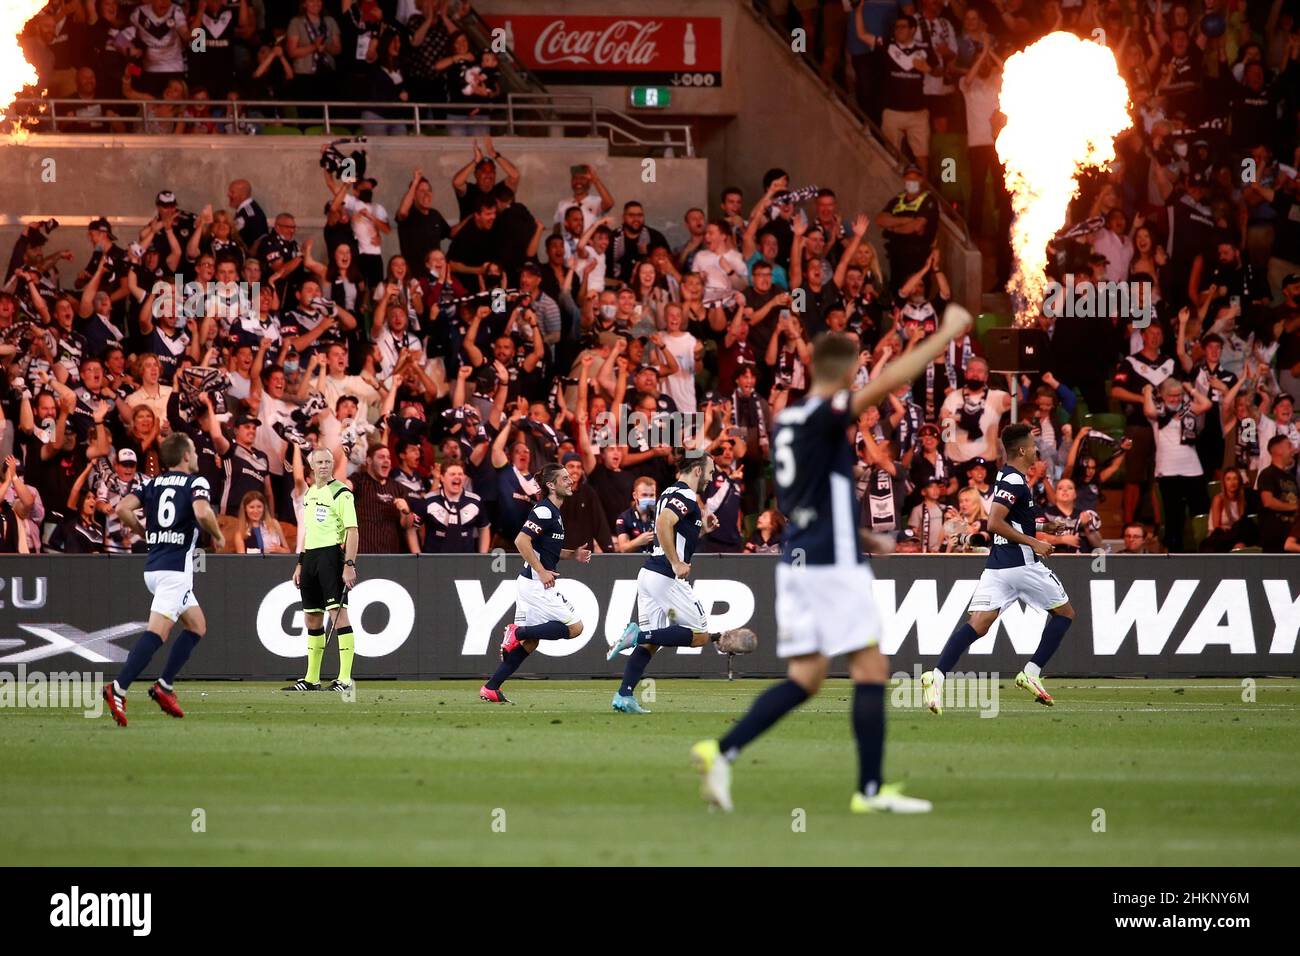 Melbourne, Australia, 5 February, 2022. Melbourne Victory celebrates the goal of Jason Davidson of Melbourne Victory during the FFA Cup Final soccer match between Melbourne Victory and Central Coast Mariners. Credit: Dave Hewison/Speed Media/Alamy Live News Stock Photo